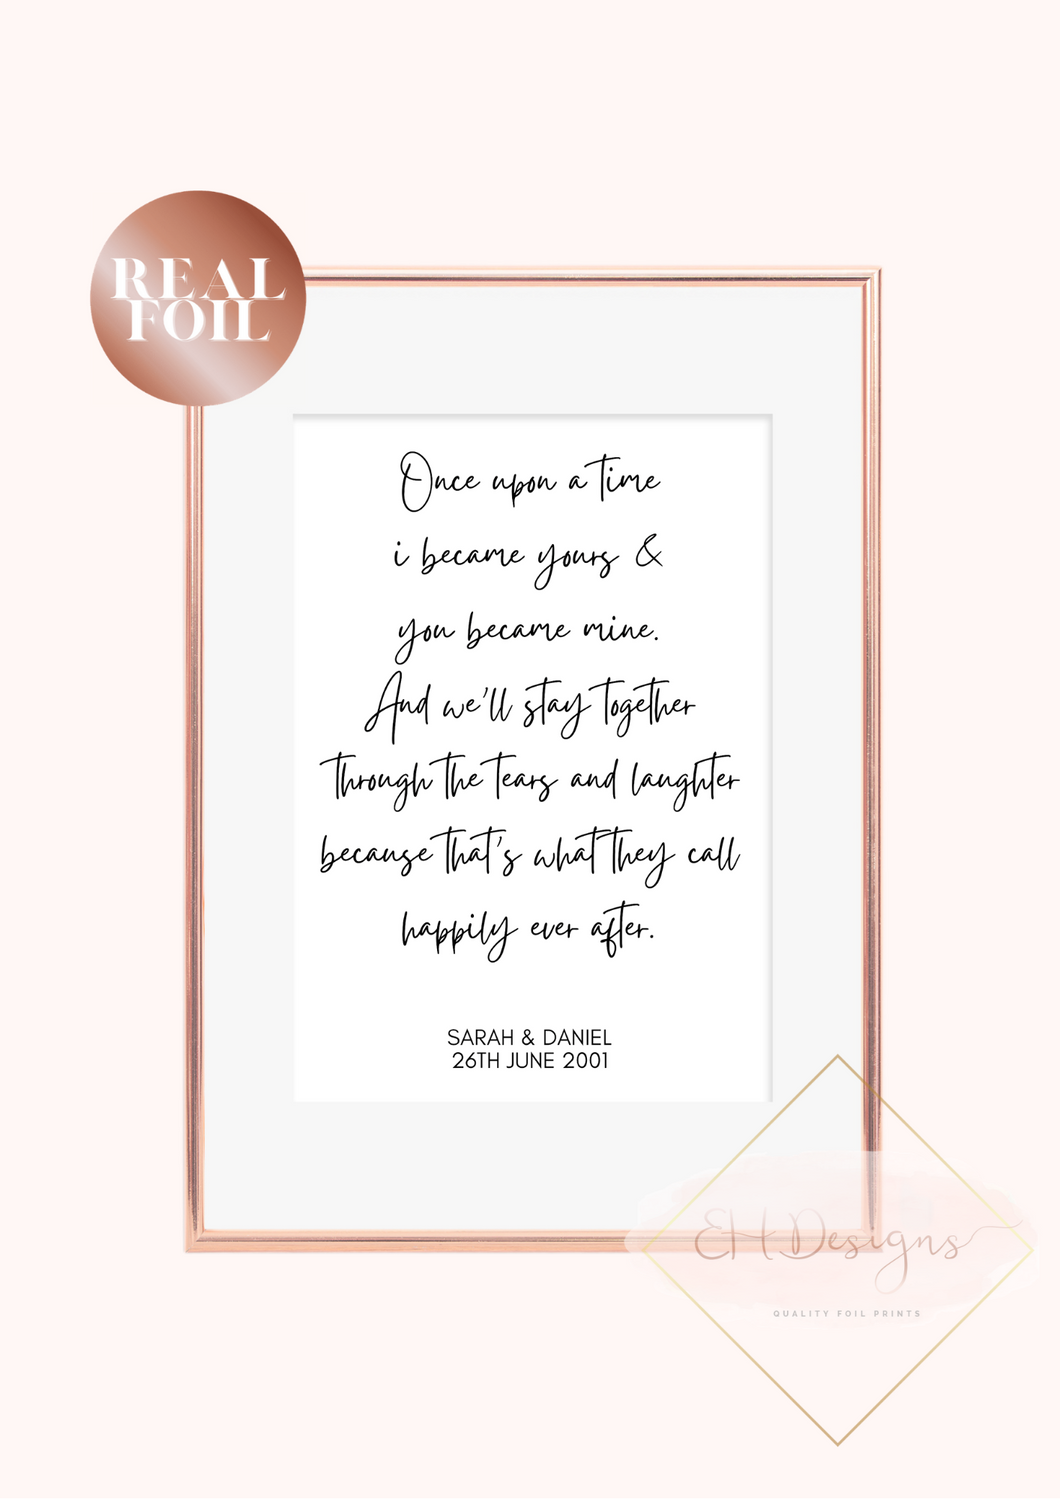 Happily ever after print